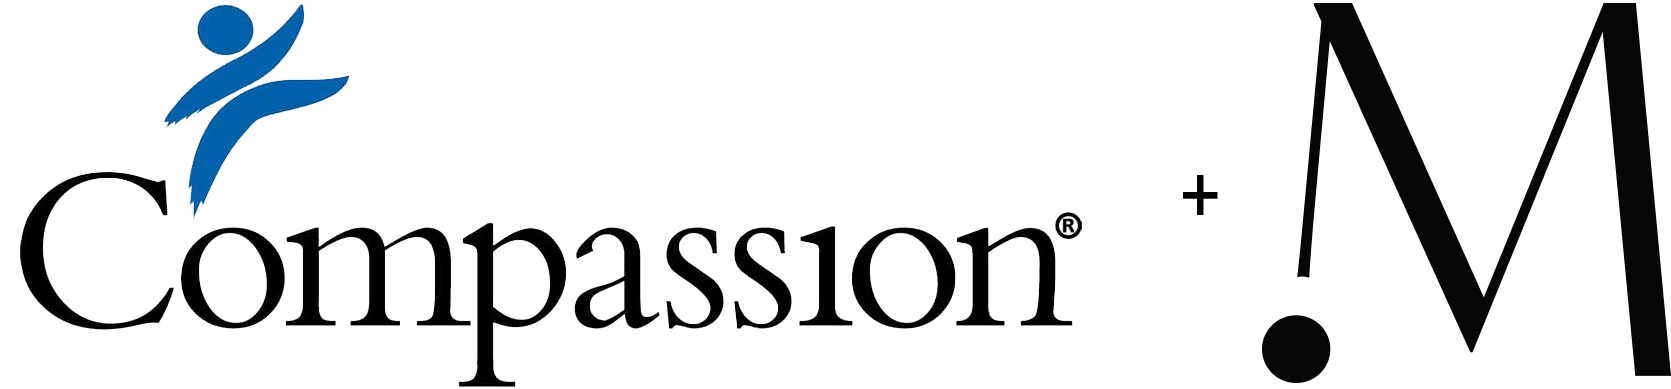 compassion international logo and momco logo with a plus sign in between the two logos.